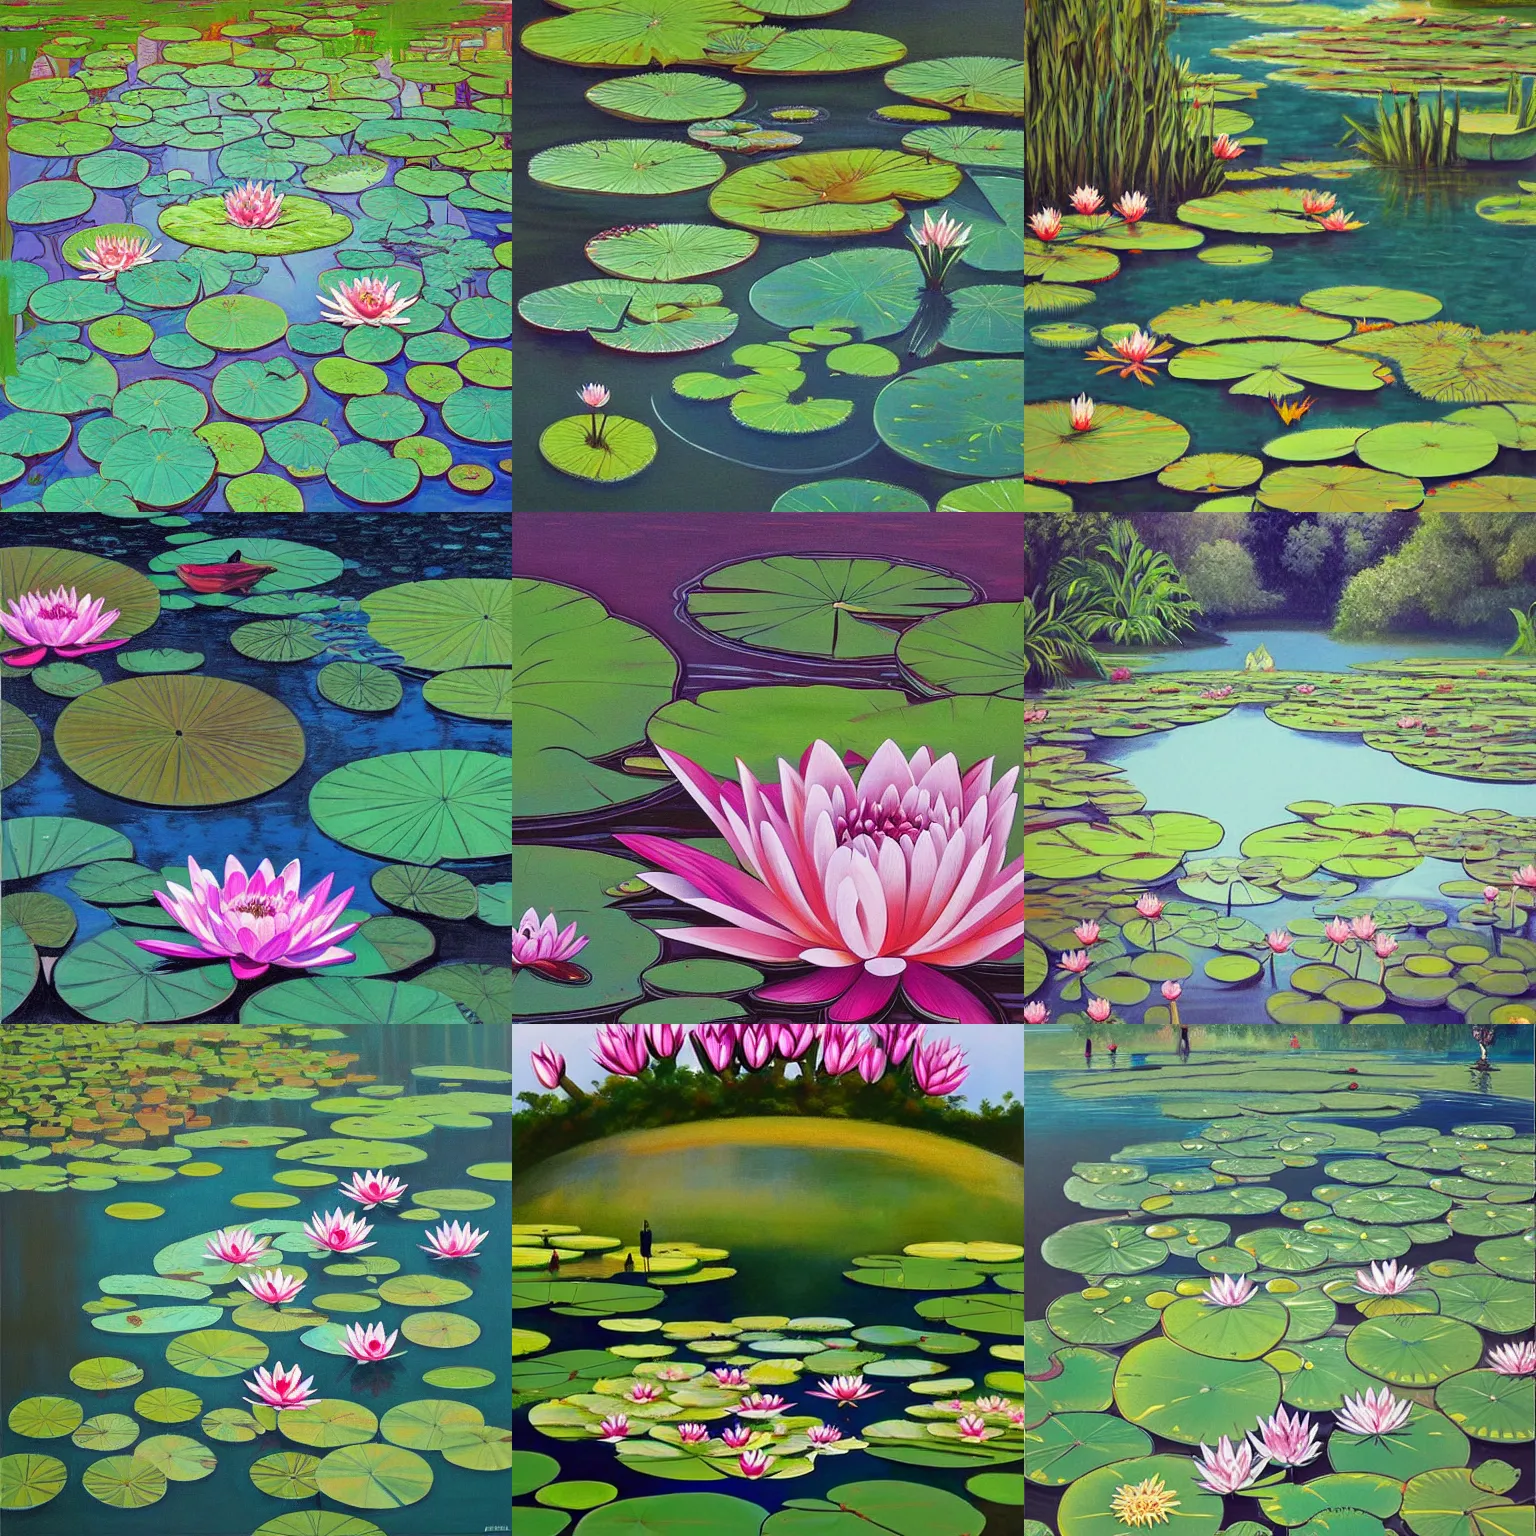 47,559 Pond Drawing Images, Stock Photos & Vectors | Shutterstock